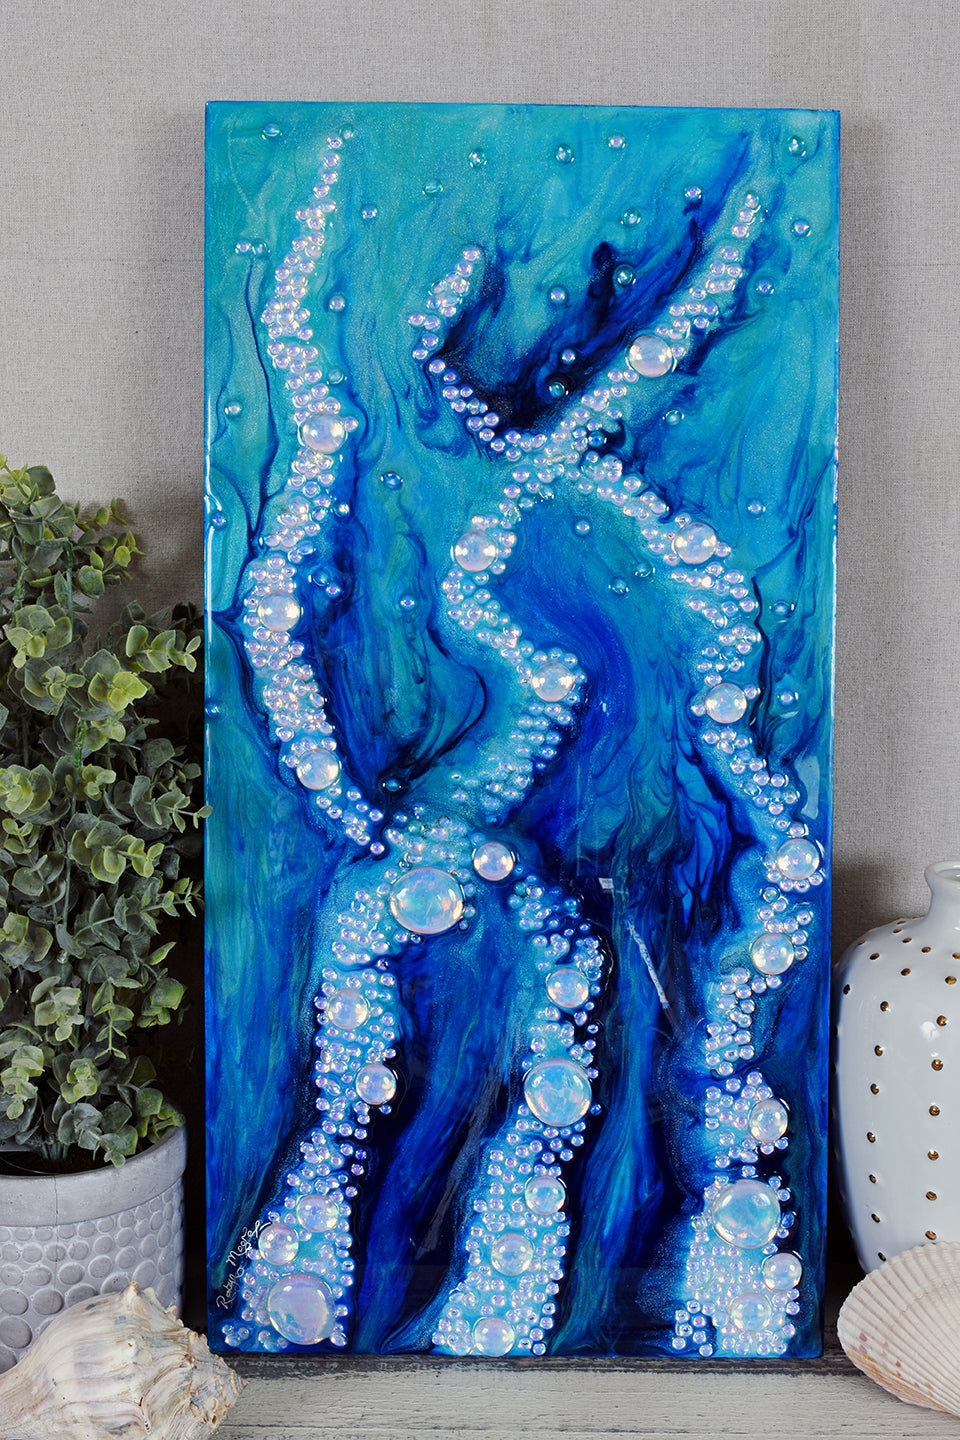 underwater blue ocean art with glass bubbles